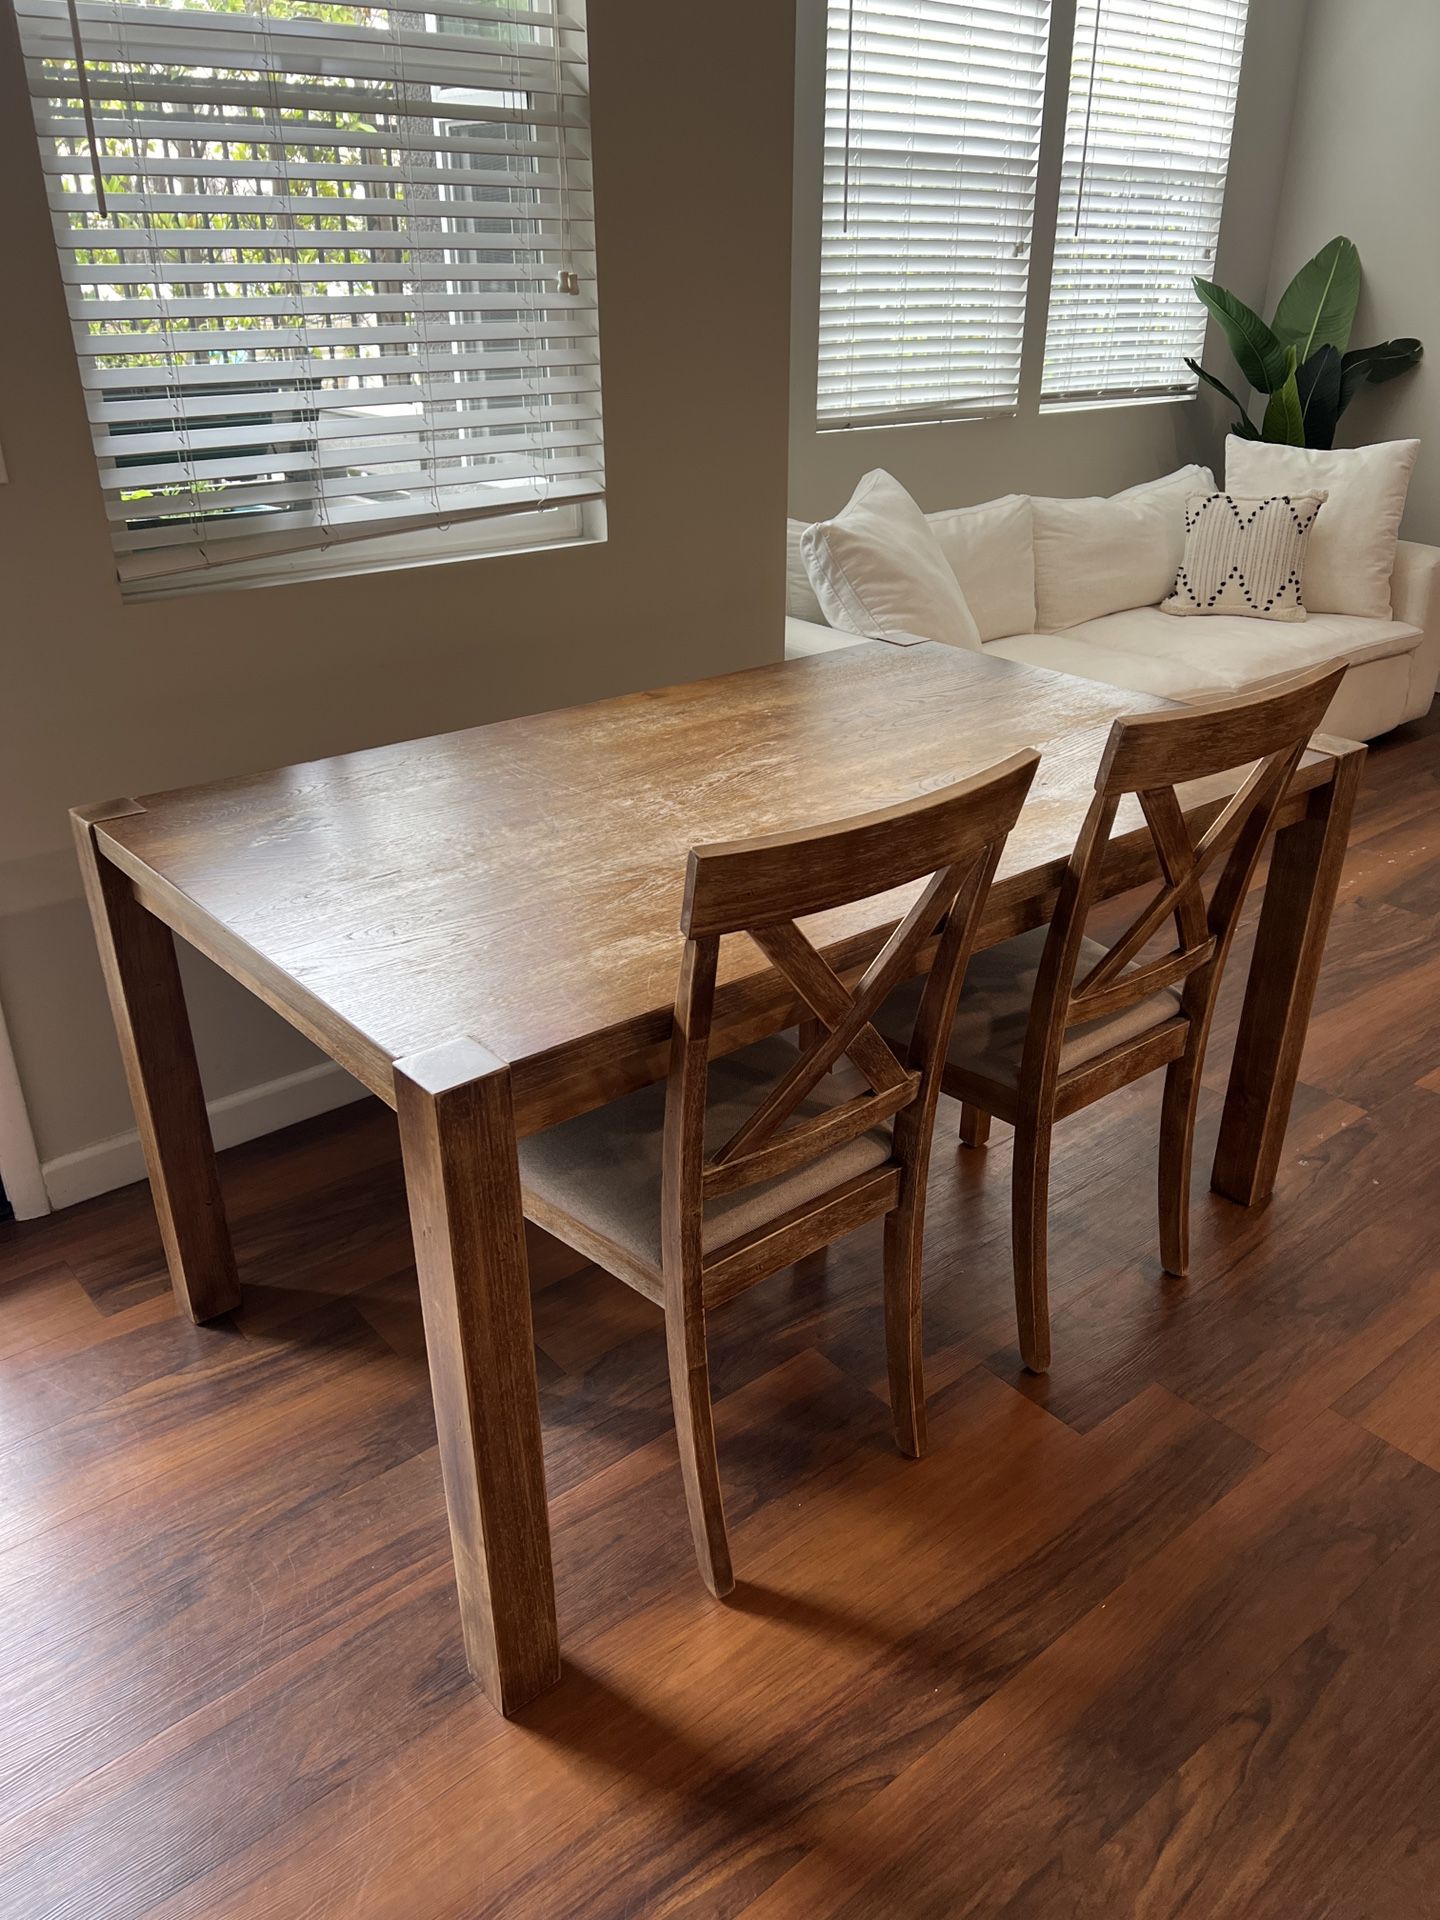 3-Piece Solid Wood Kitchen Table and Chairs